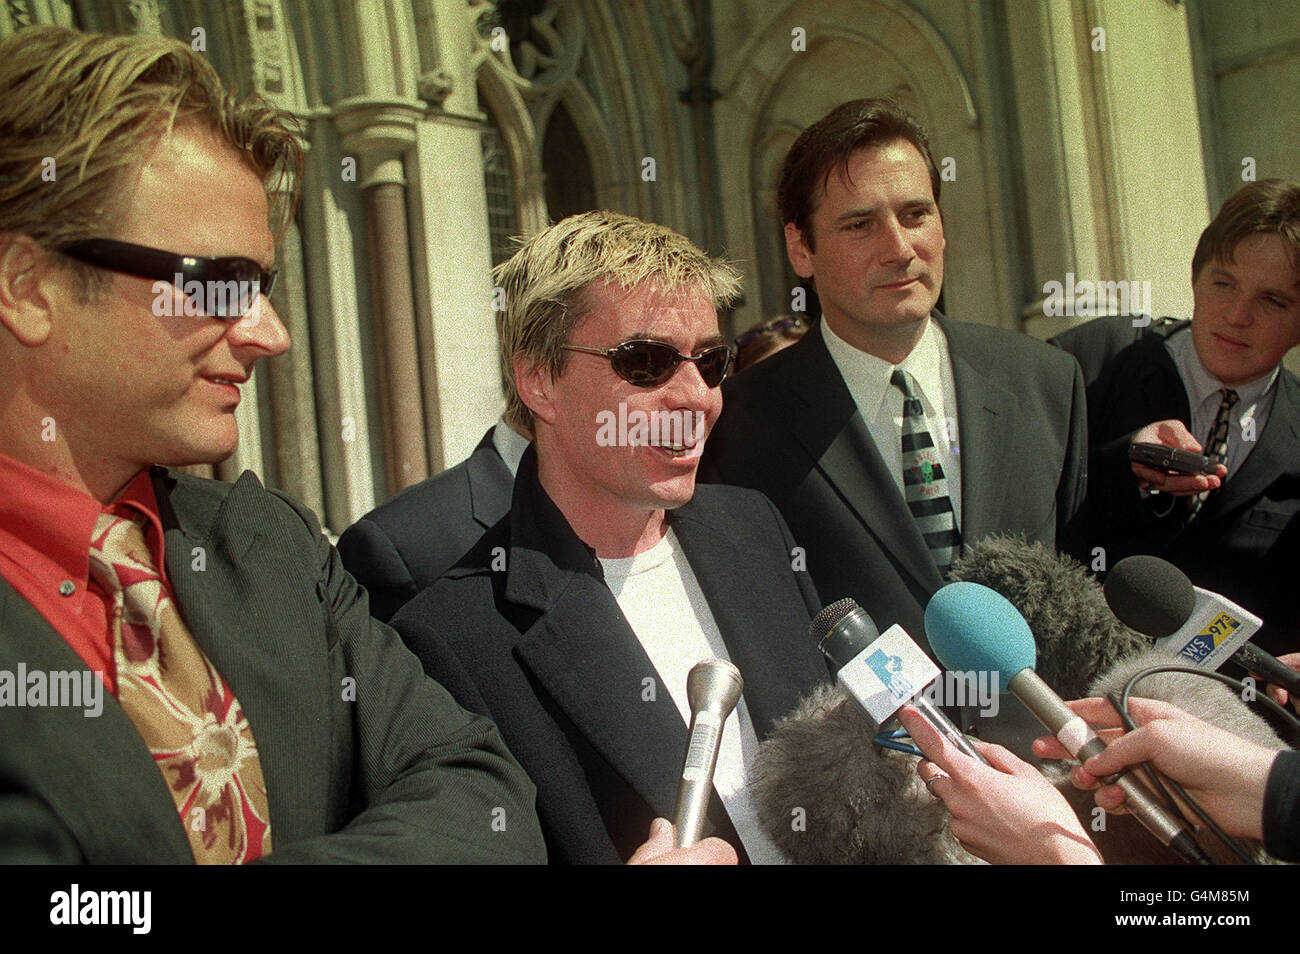 Former members of 80's pop group Spandau Ballet, Saxophonist Steve Norman (left) drummer John Keeble and lead singer Tony Hadley (right), outside London's High Court, where they lost their claim for royalties from songwriter Gary Kemp. Stock Photo